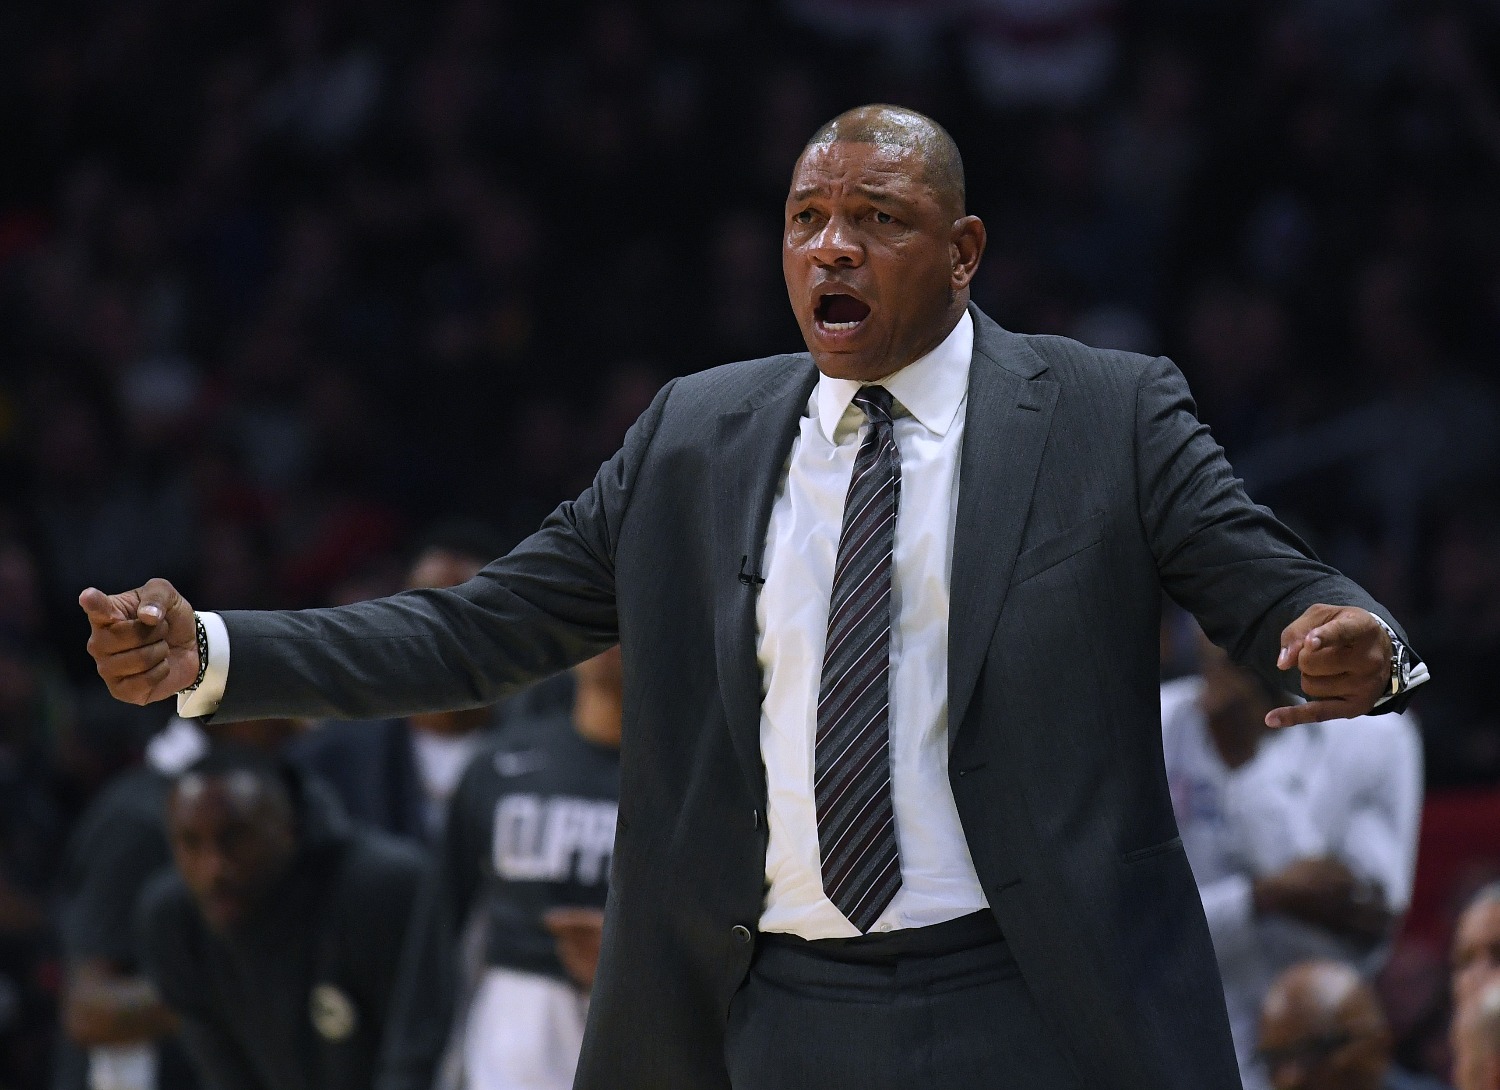 After getting fired from the Clippers recently, Doc Rivers just secured his next NBA coaching job, as he will be the new head coach of the Philadelphia 76ers.